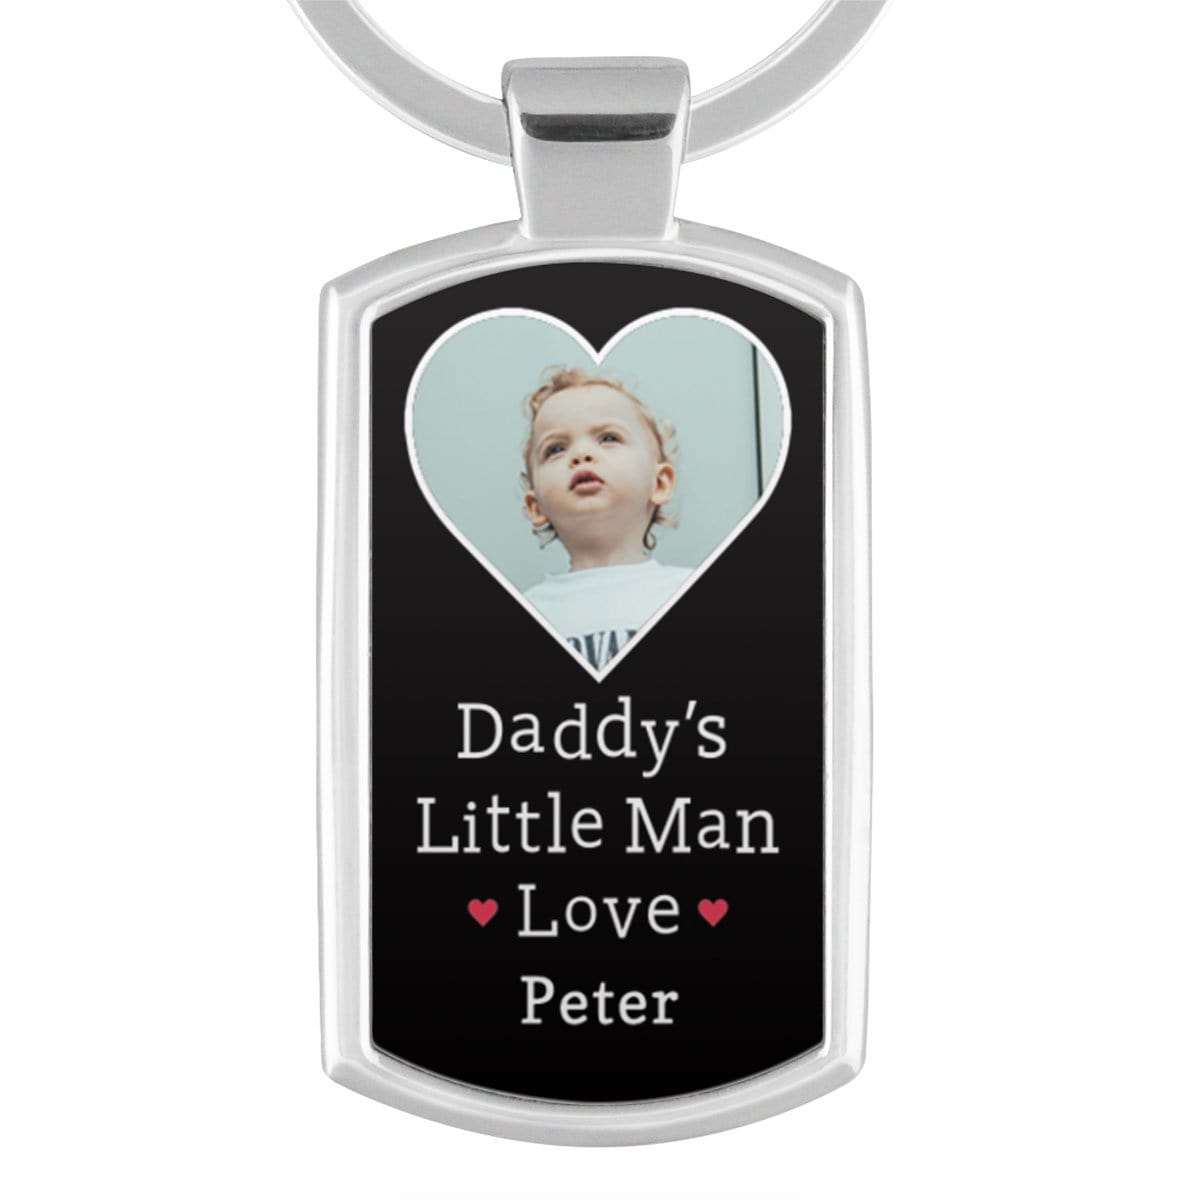 Daddy's Little Man Personalised Keyring